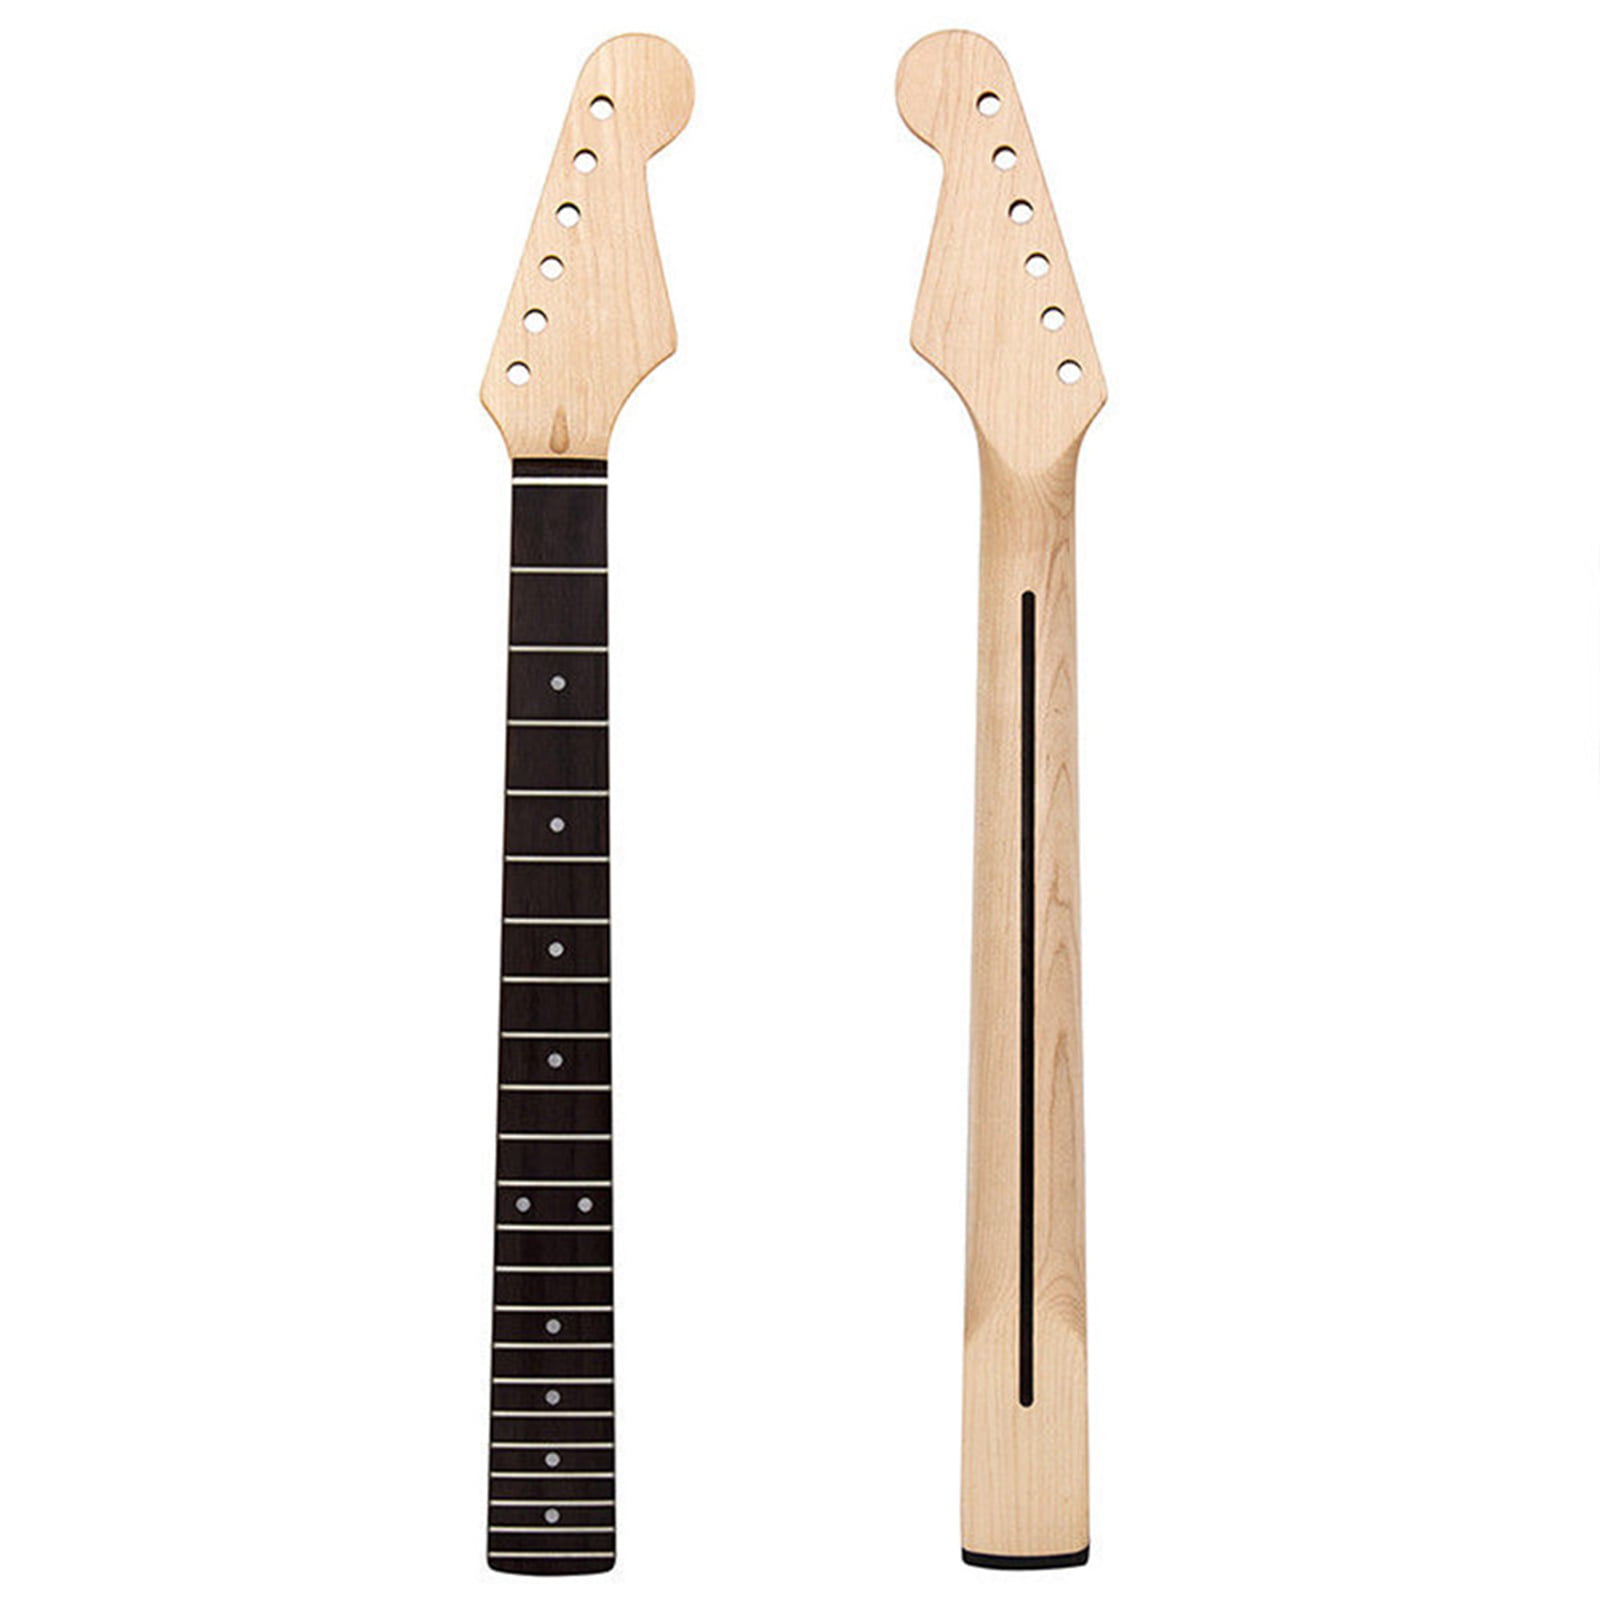 Rosewood Fingerboard Maple Neck Portable for Guitarist for Guitar Beginners